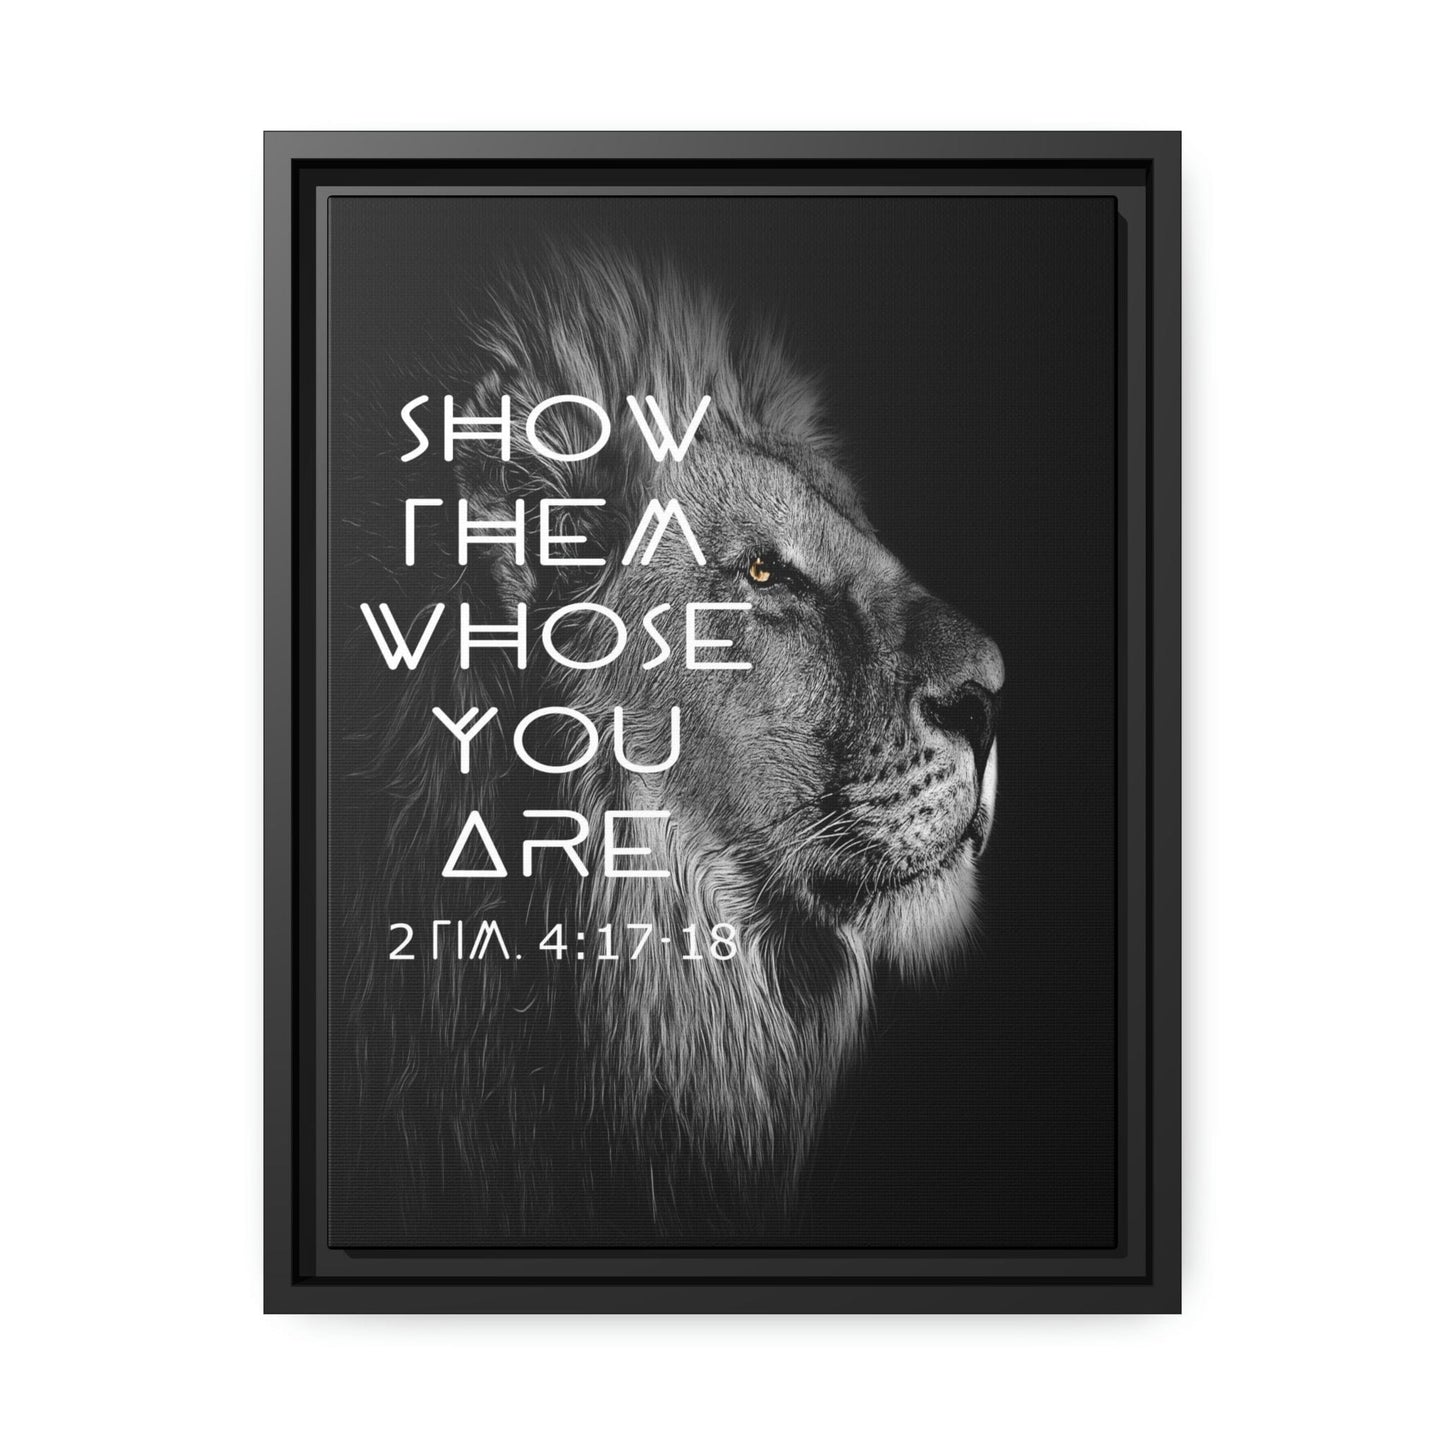 Printify Canvas 12″ x 16″ (Vertical) / Black / 1.25" Show Them Whose You Are - 2 Tim 4:17-18 Christian Canvas Wall Art